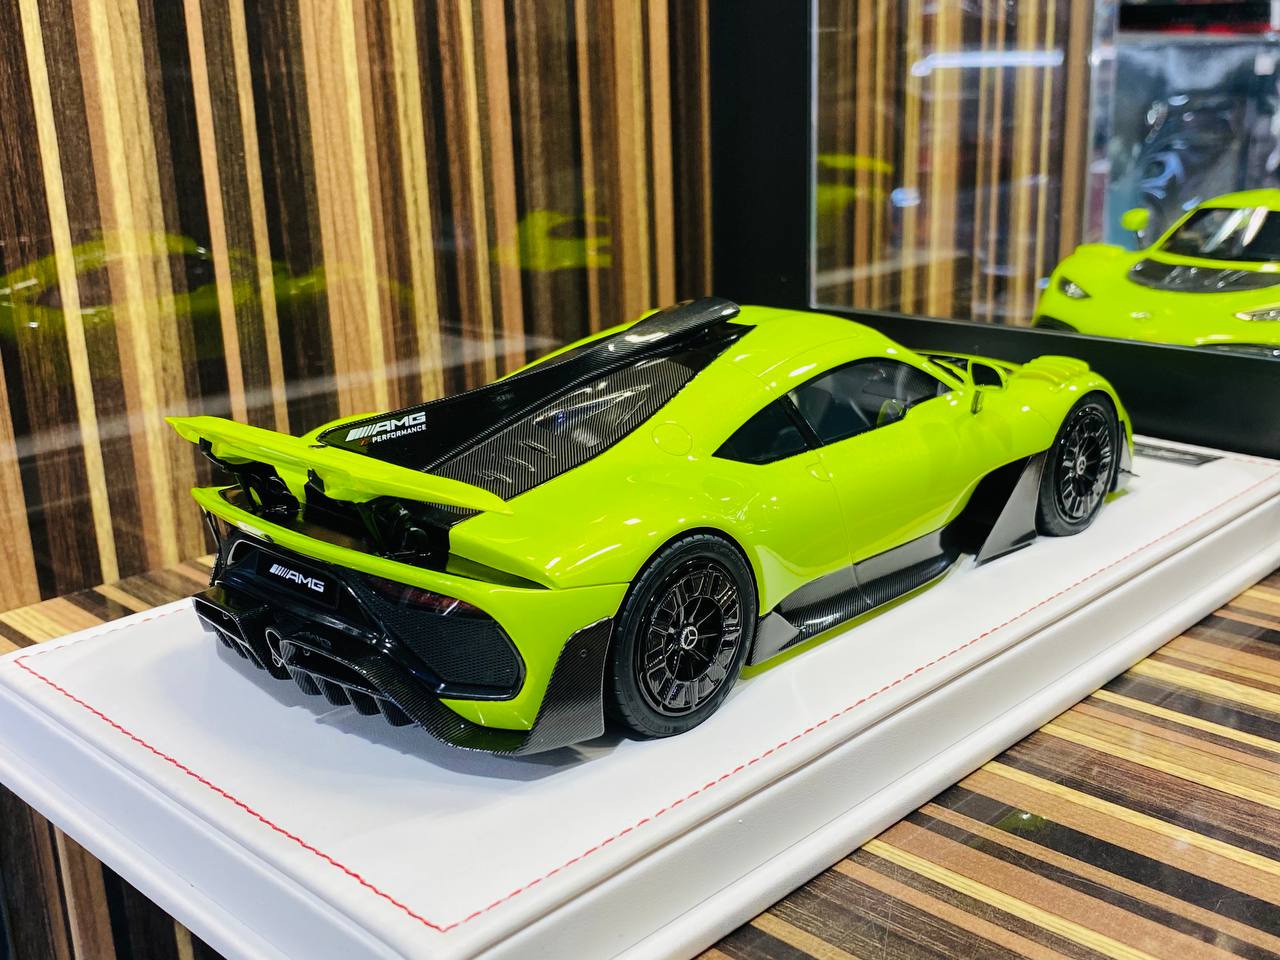 Exclusive IVY Models Mercedes Benz AMG ONE [Resin Green | Limited Edition]